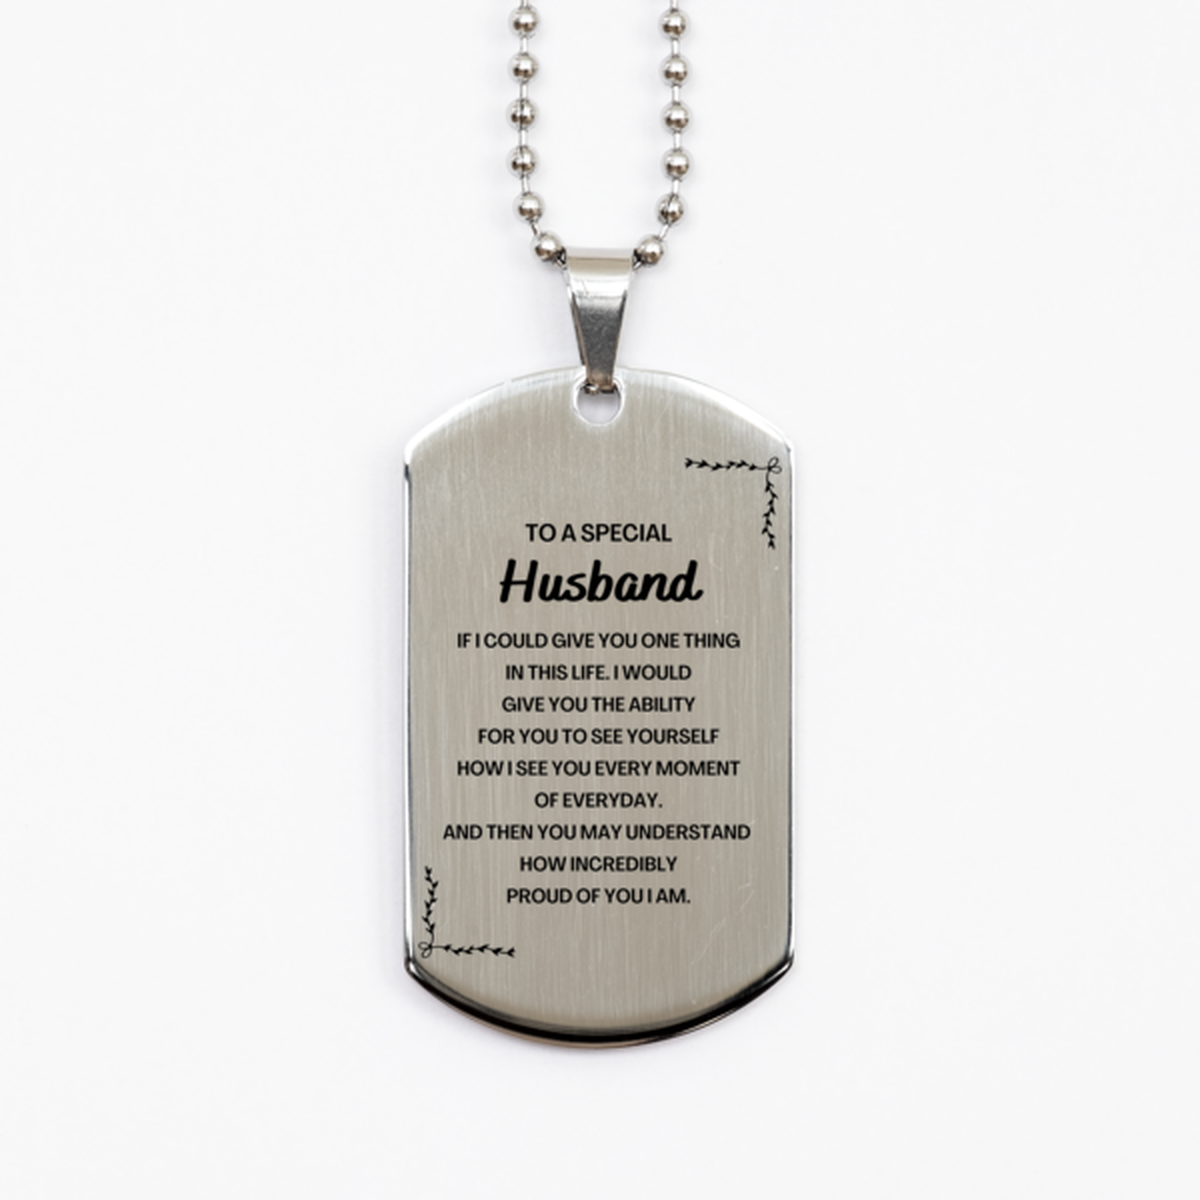 To My Husband Silver Dog Tag, Gifts For Husband Engraved, Inspirational Gifts for Christmas Birthday, Epic Gifts for Husband To A Special Husband how incredibly proud of you I am